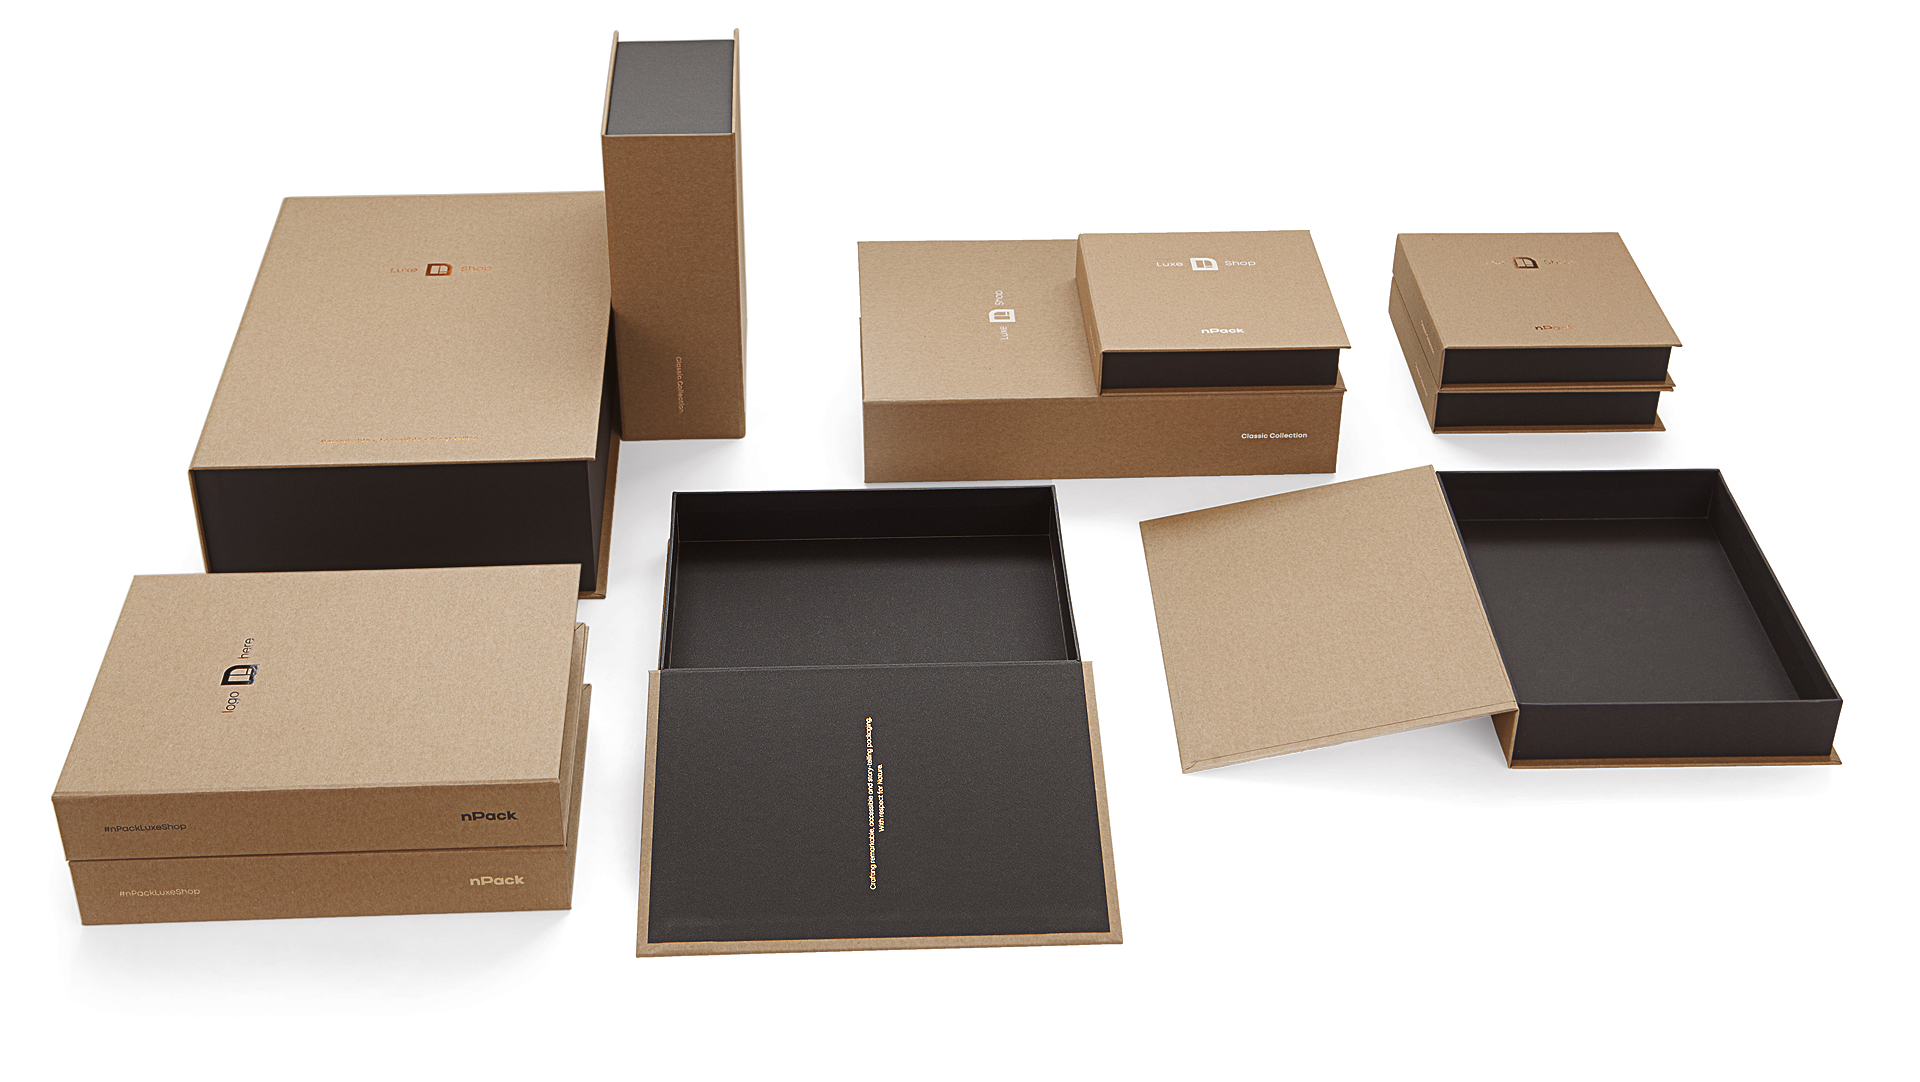 Handcrafted Rigid Gift Box with magnets in SH Recycling paper and Koehler Brilliant Black paper, manufactured in Europe